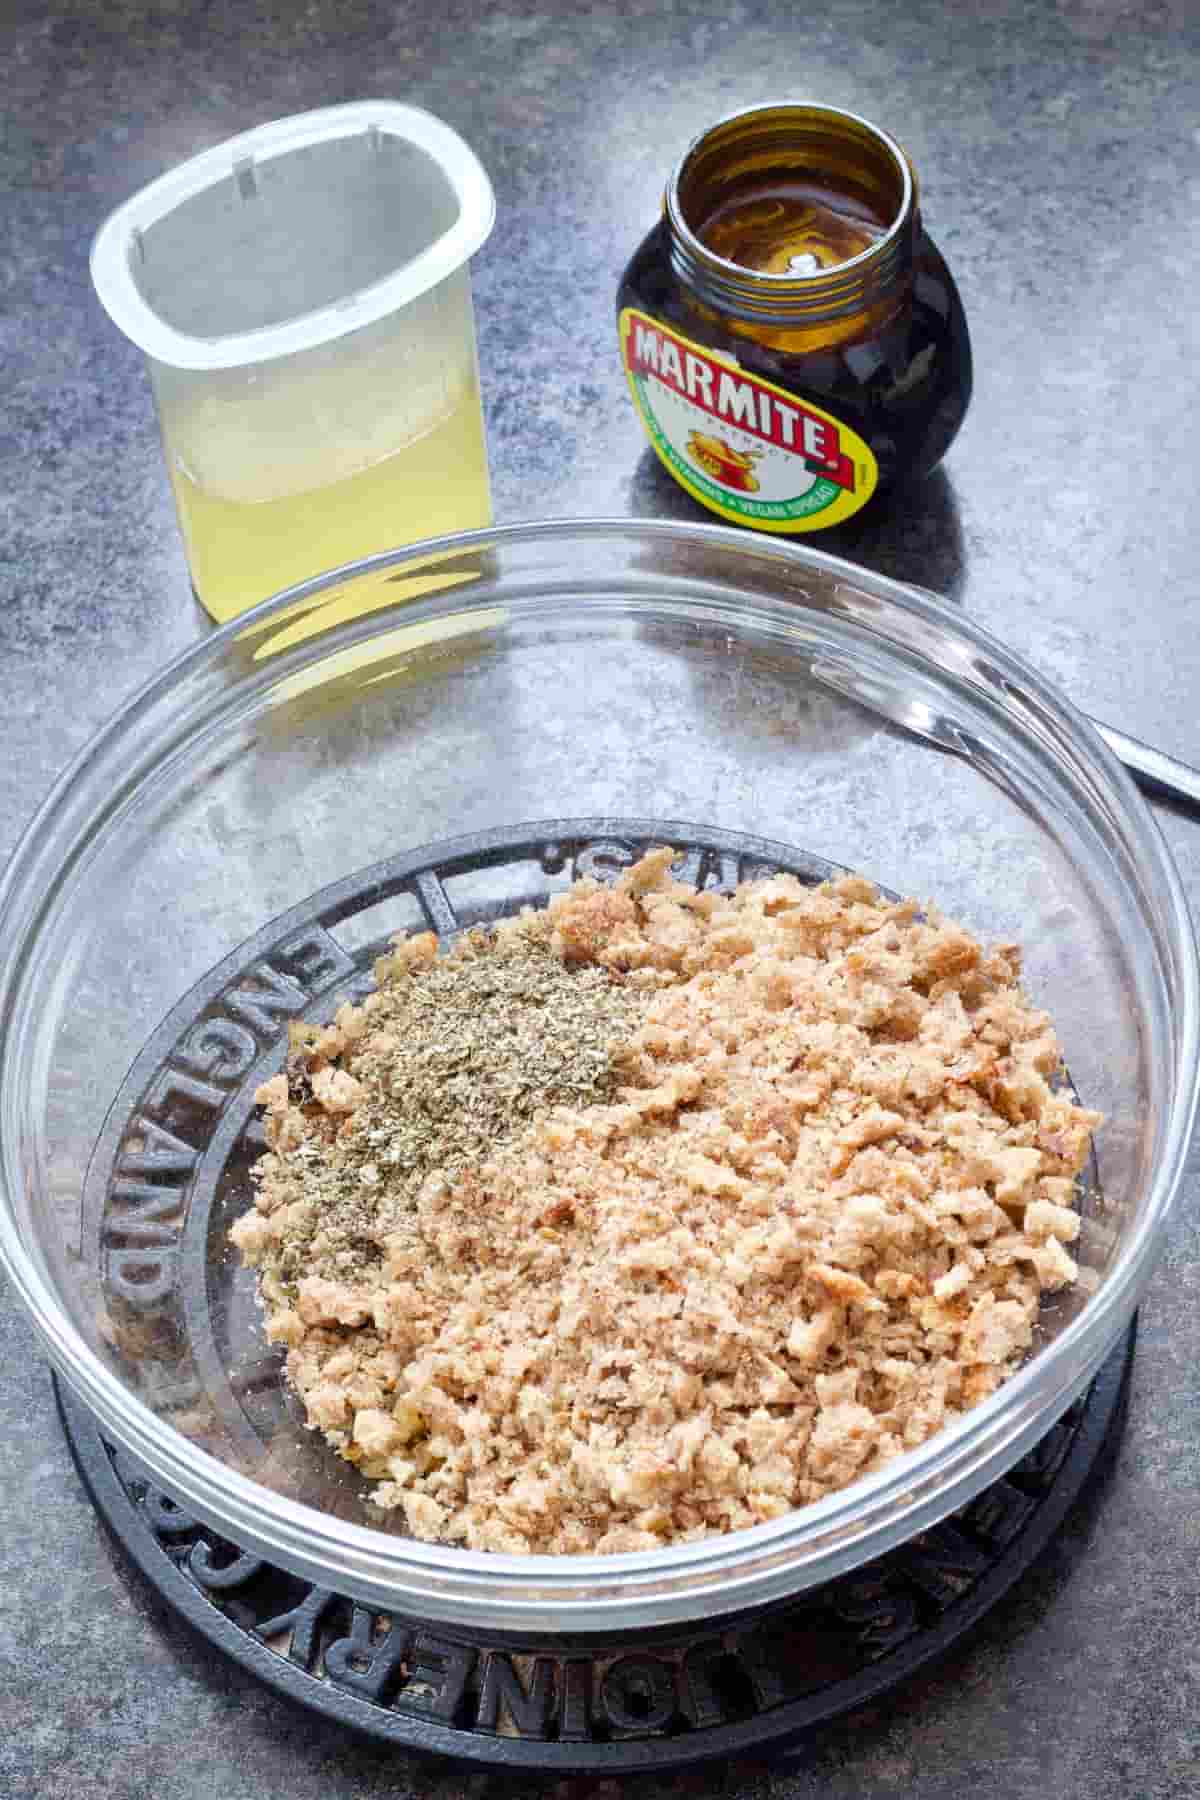 Bowl with breadcrumbs & sage, marmite jar & cup with stock.